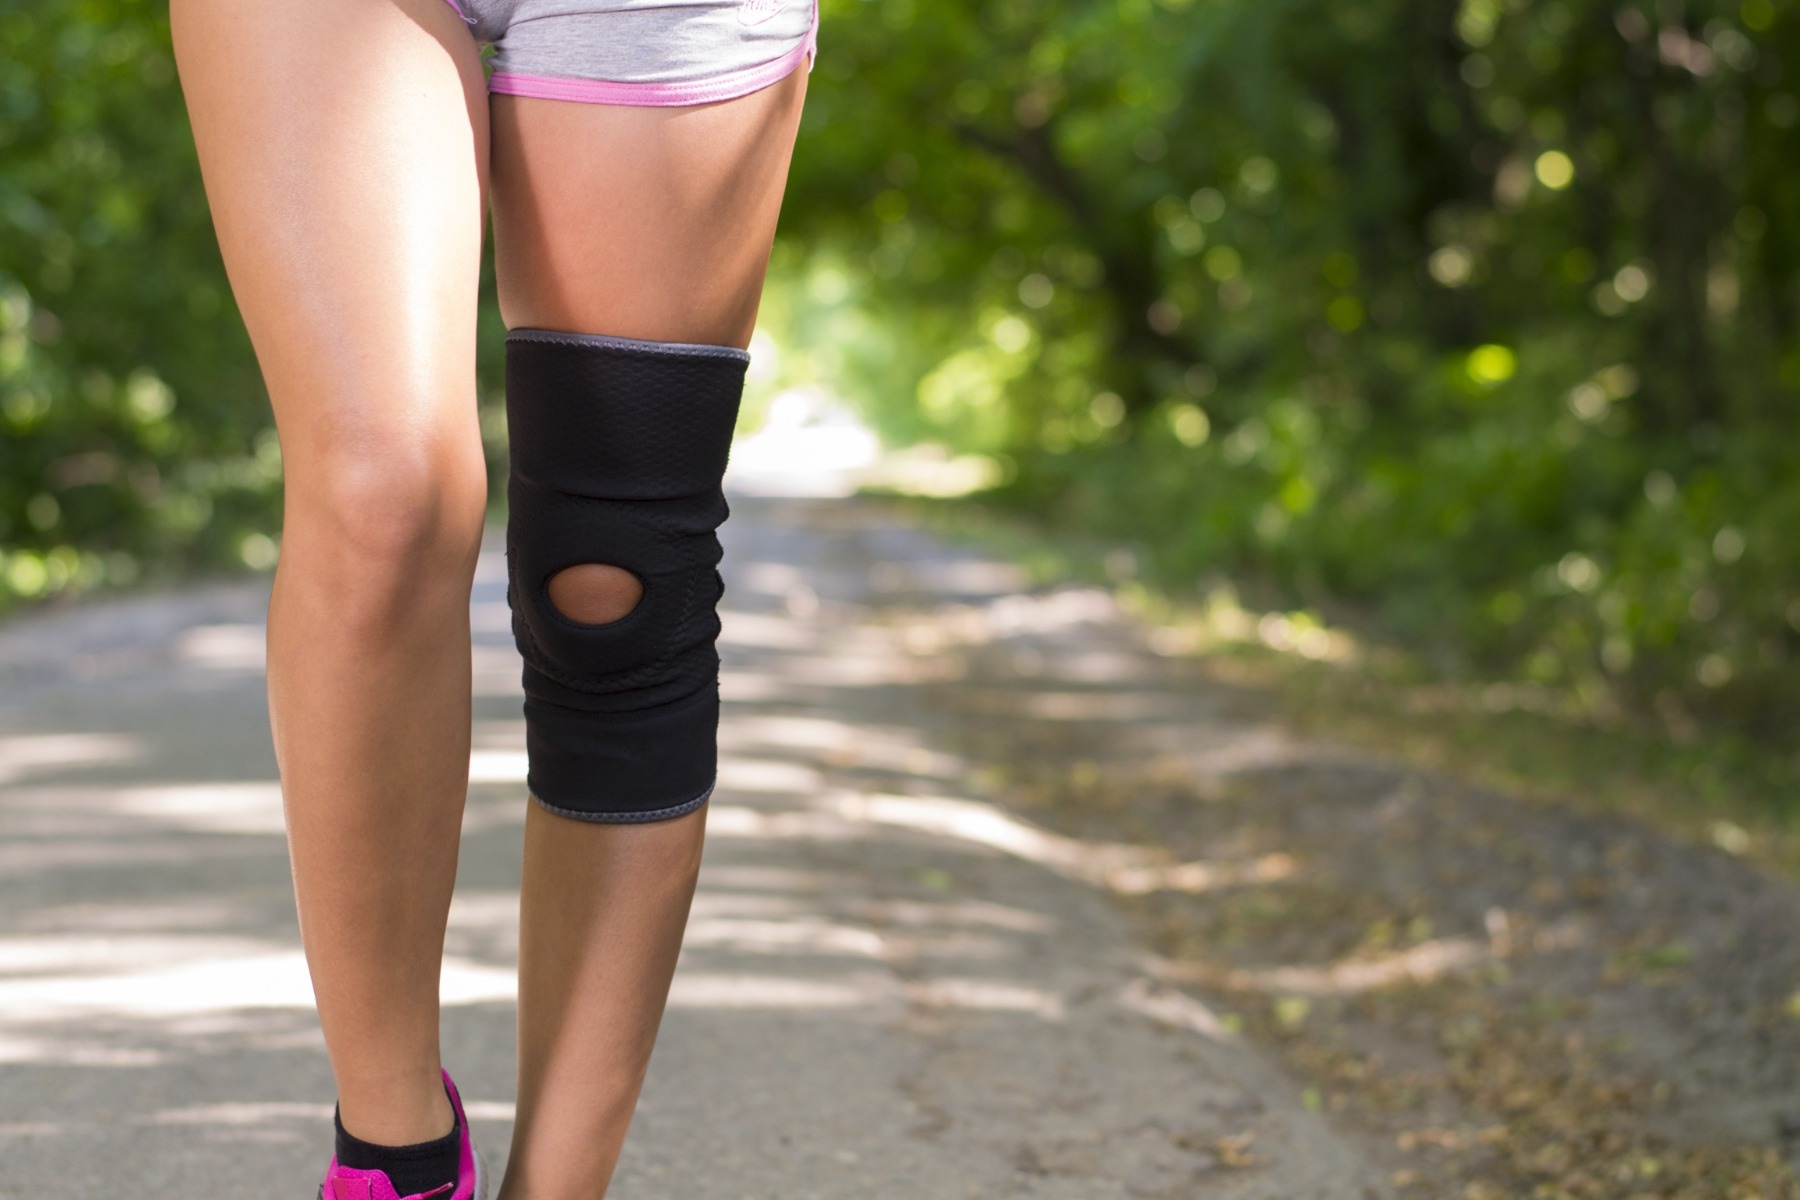 WEAR A KNEE BRACE WITH PANTS: WHAT YOU NEED TO KNOW